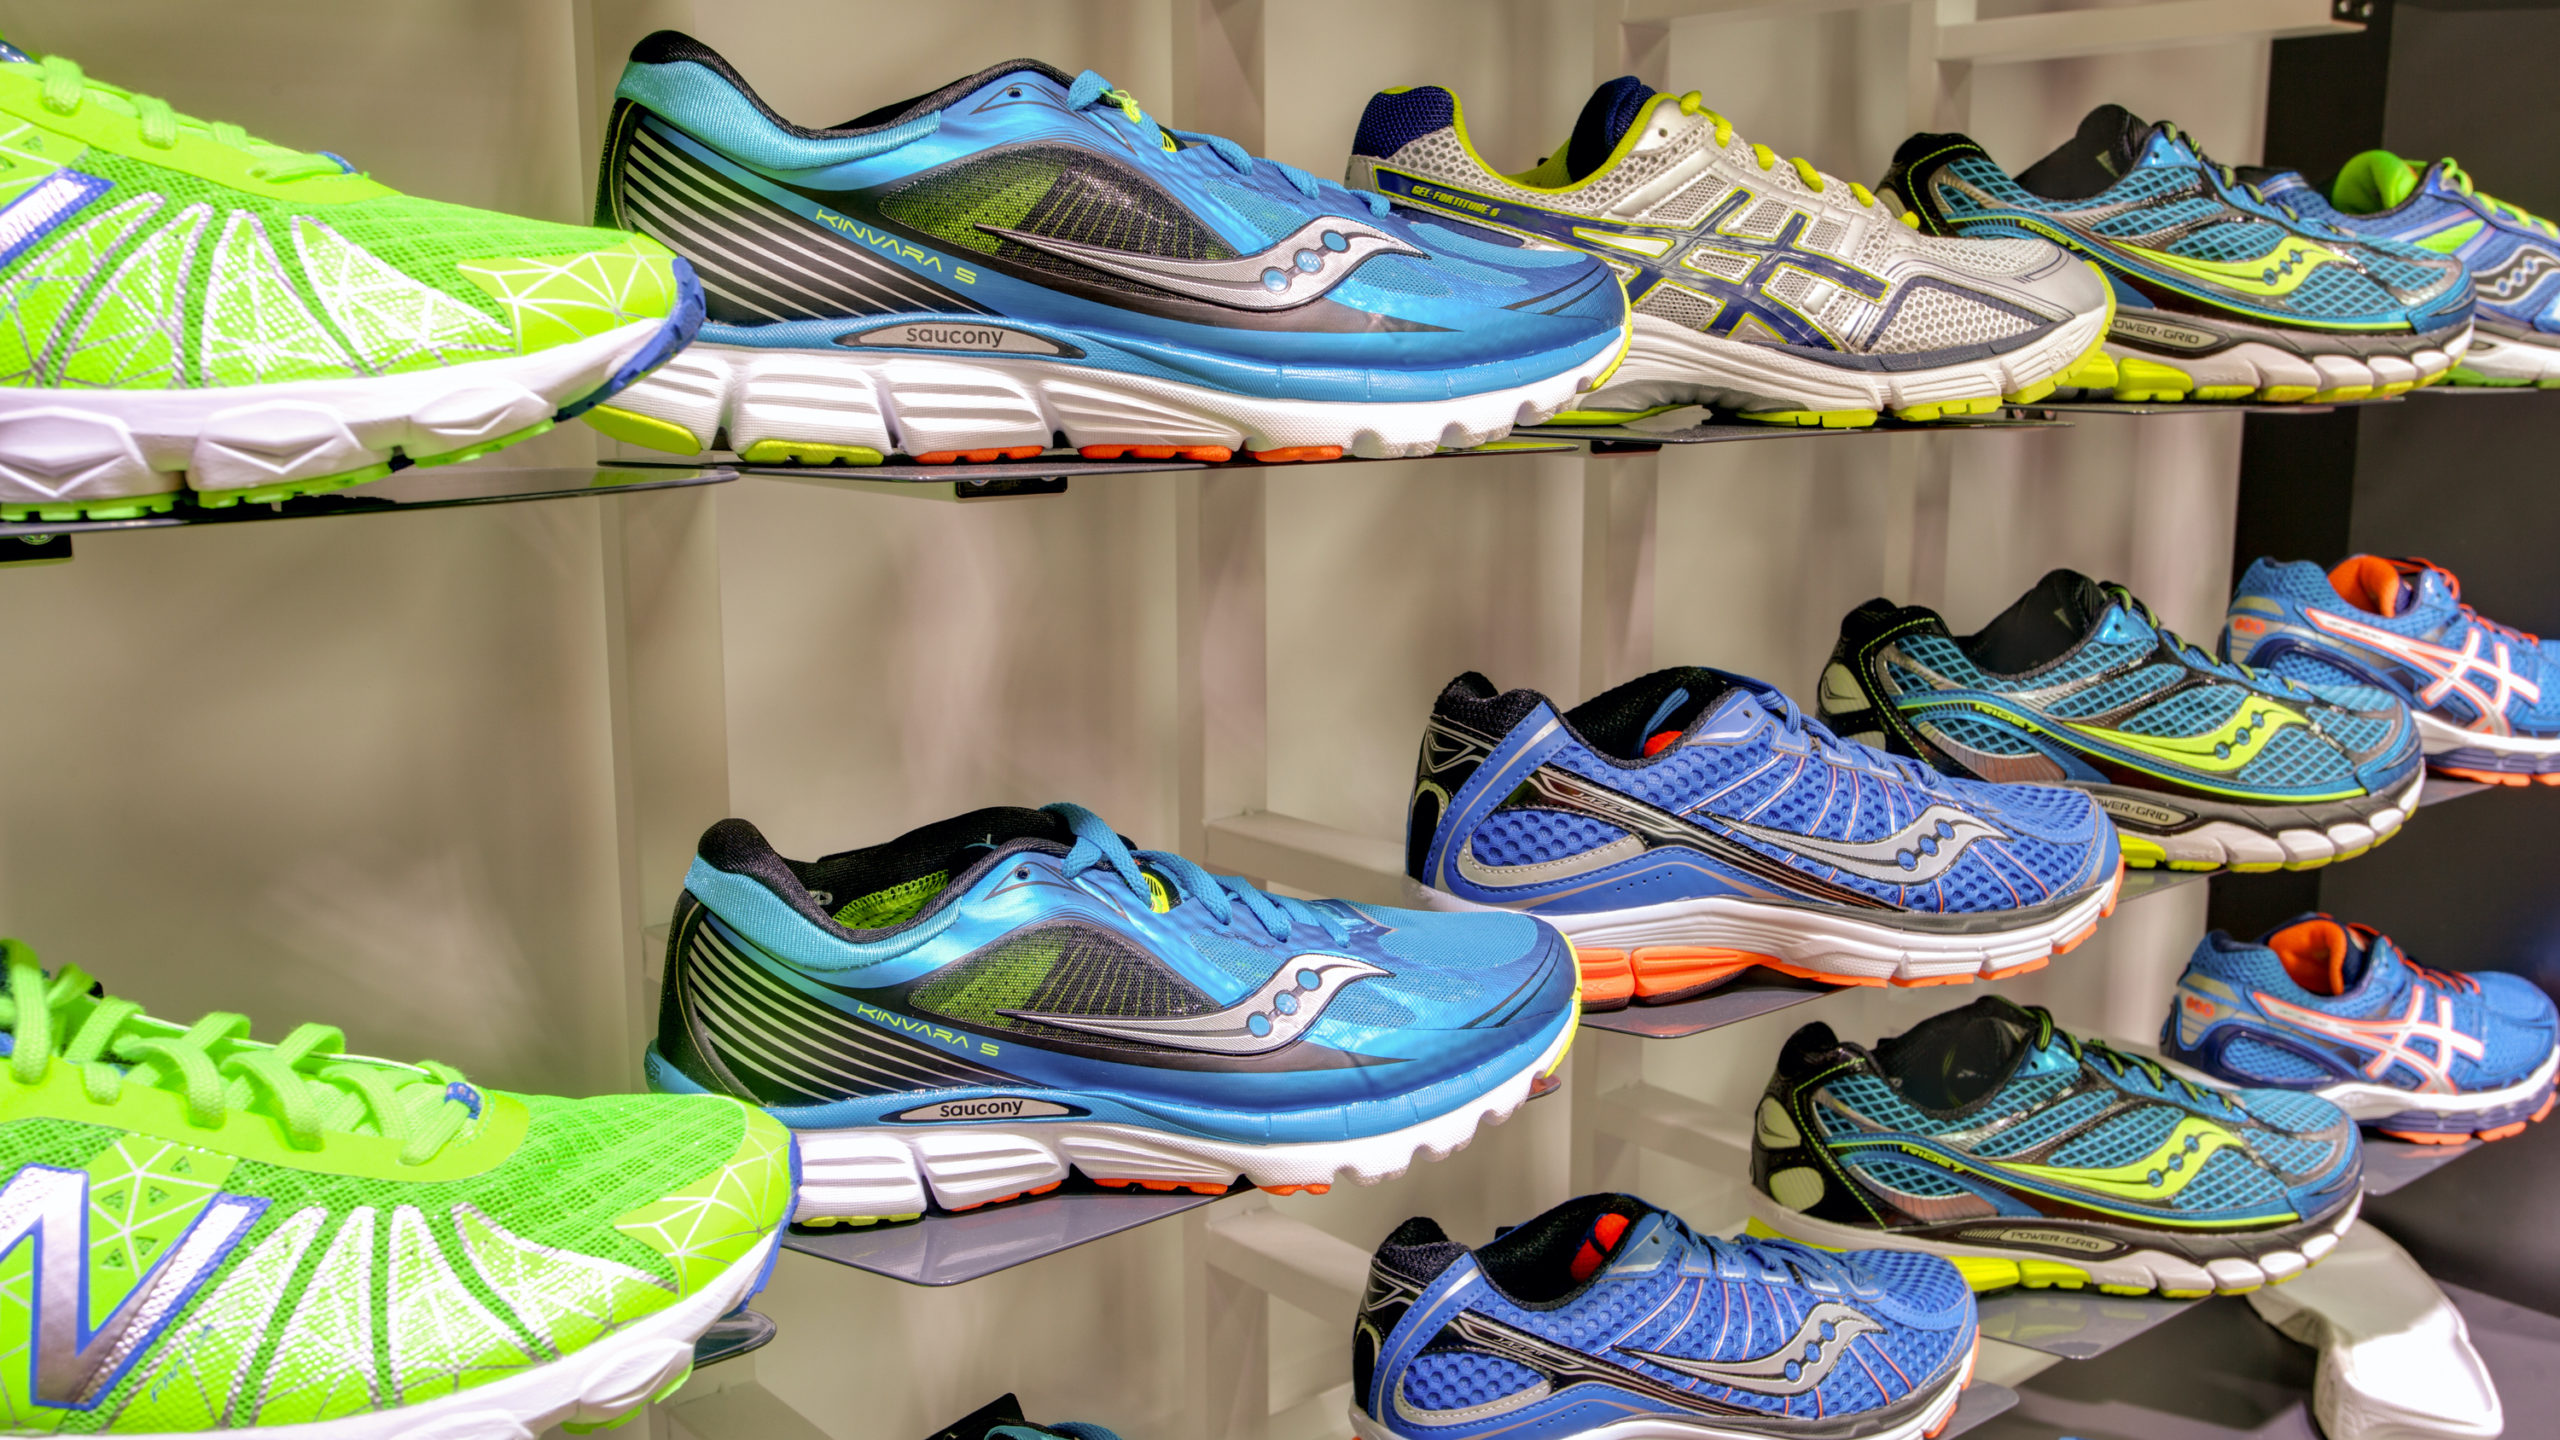 What’s the Difference Between All These Running Shoes?